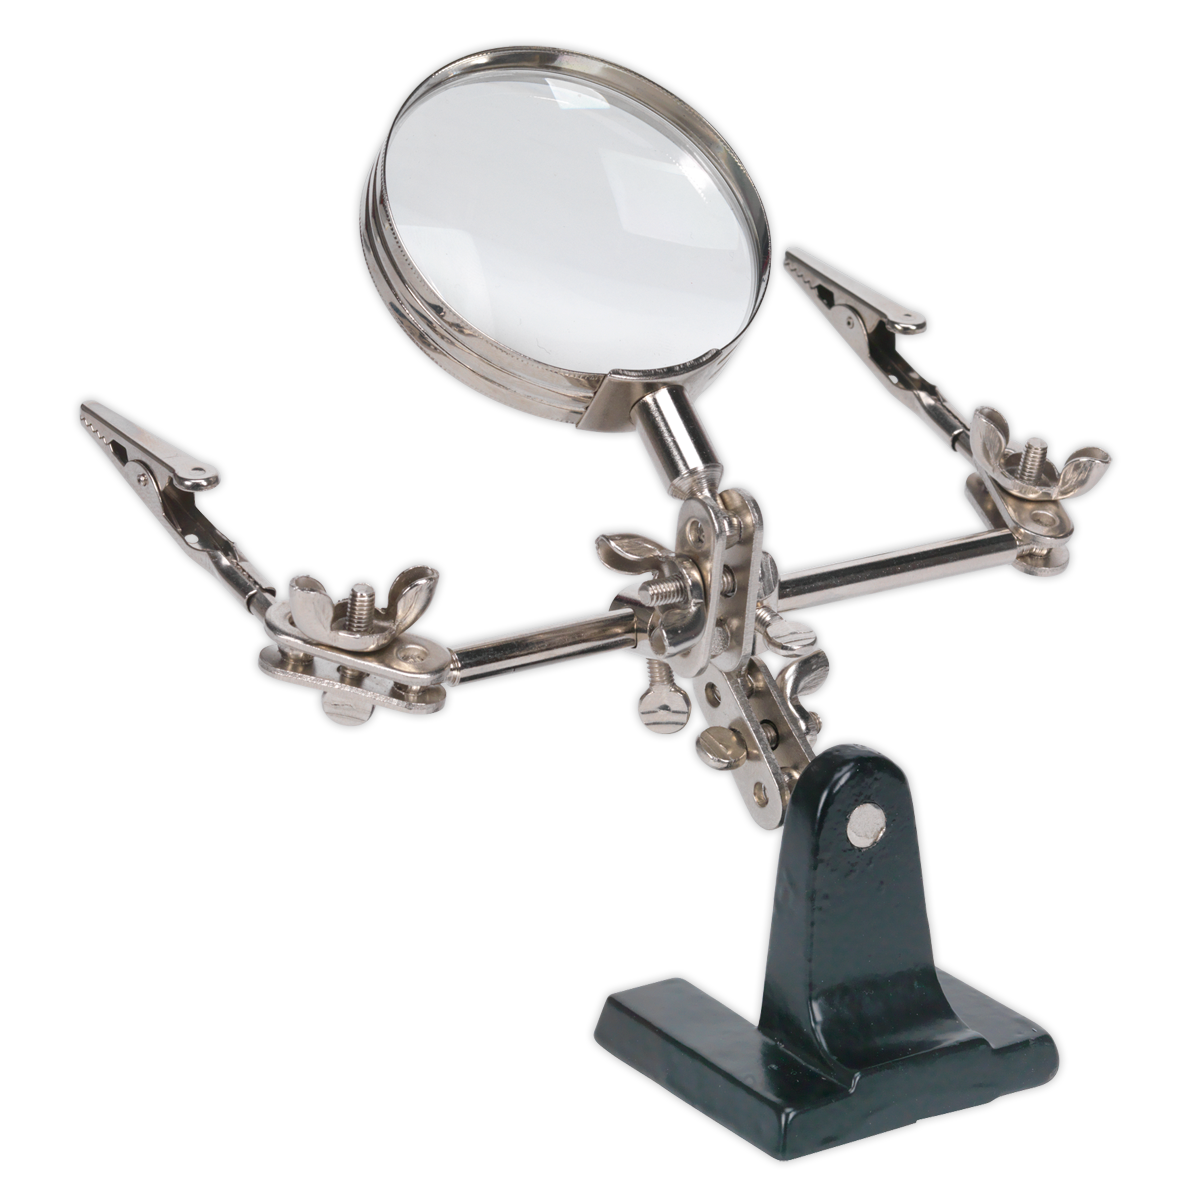 Mini Robot Soldering Stand with Magnifier - SD150 - Farming Parts